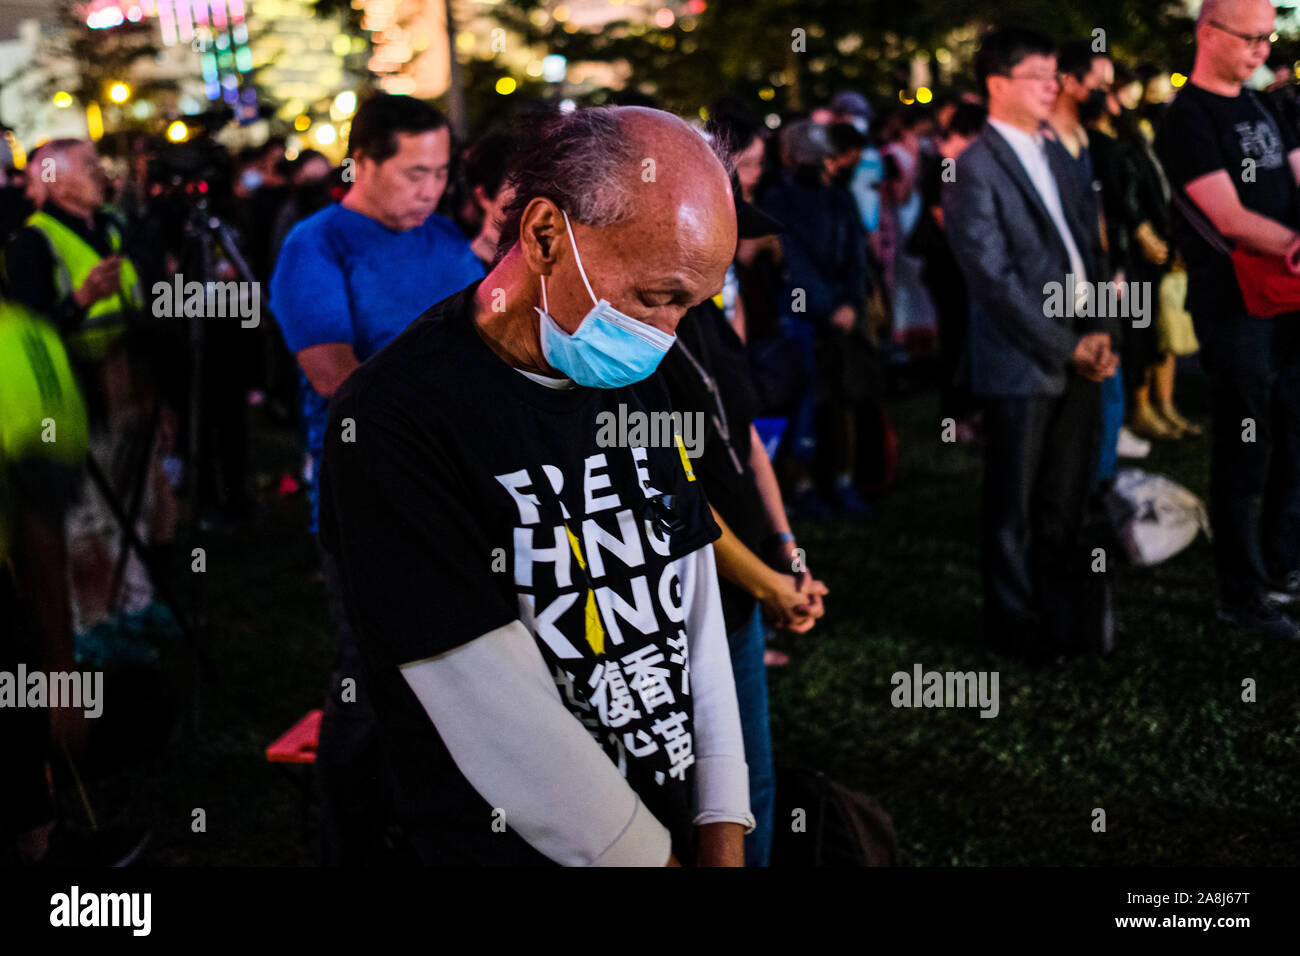 Hong Kong, China. 9th Nov, 2019. Tens of thousands of Hong Kongers pray during a memorial rally at Tamar Park in Hong Kong to mourn the death of a 22 years old university student Alex Chow Tsz Lok, who died from a serious brain injury during a fall on November 4th as police skirmished with demonstrators last weekend. He was left in critical condition and died after suffering a cardiac arrest on Friday. Credit: Keith Tsuji/ZUMA Wire/Alamy Live News Stock Photo